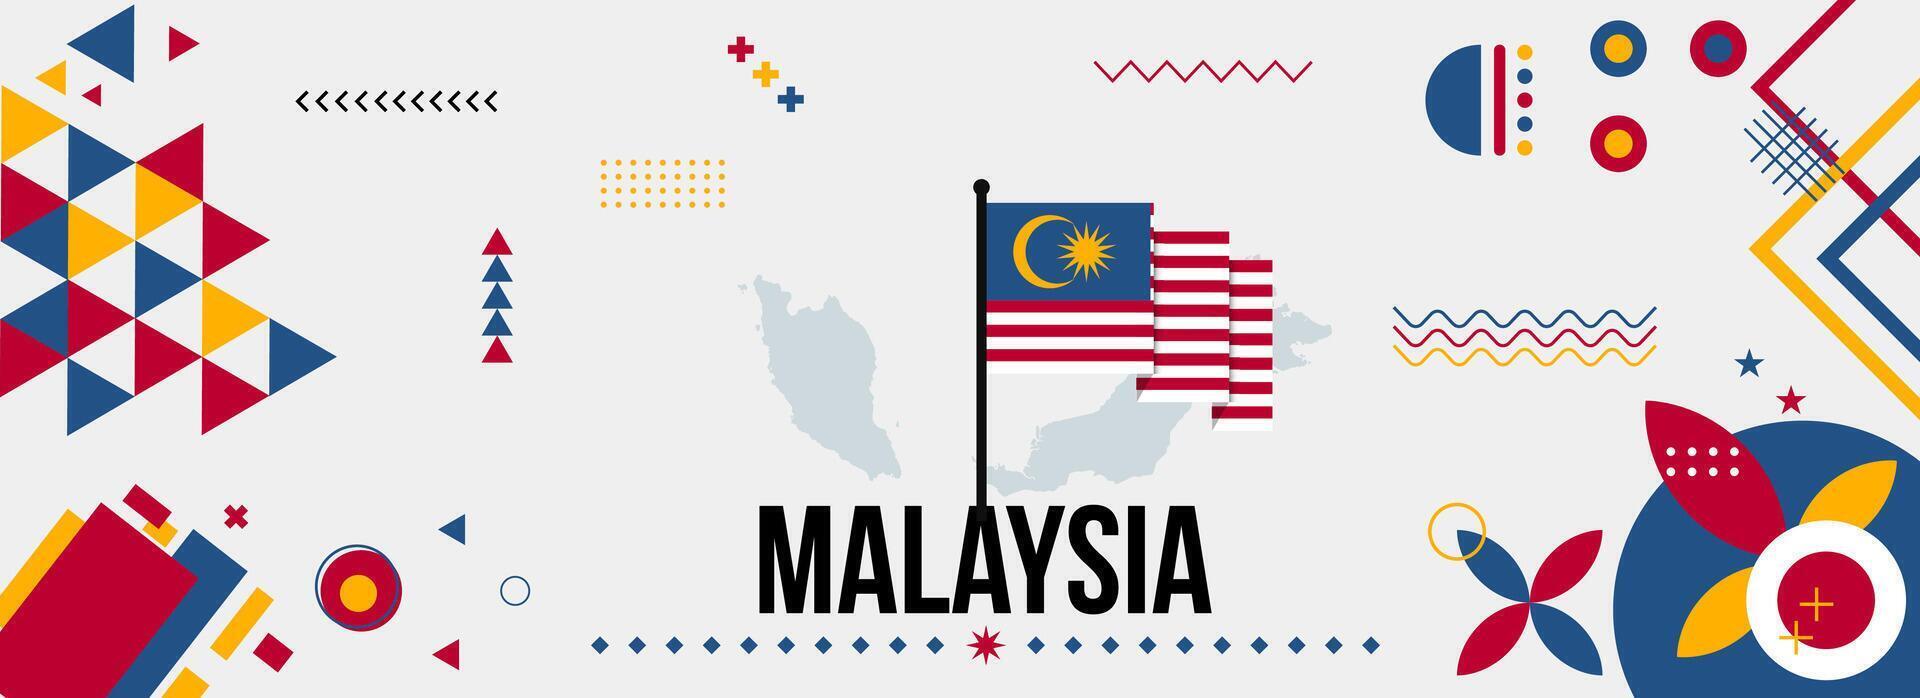 Malaysia national or independence day banner for country celebration. Flag and map of Malaysia with modern retro design with typorgaphy abstract geometric icons. Vector illustration.